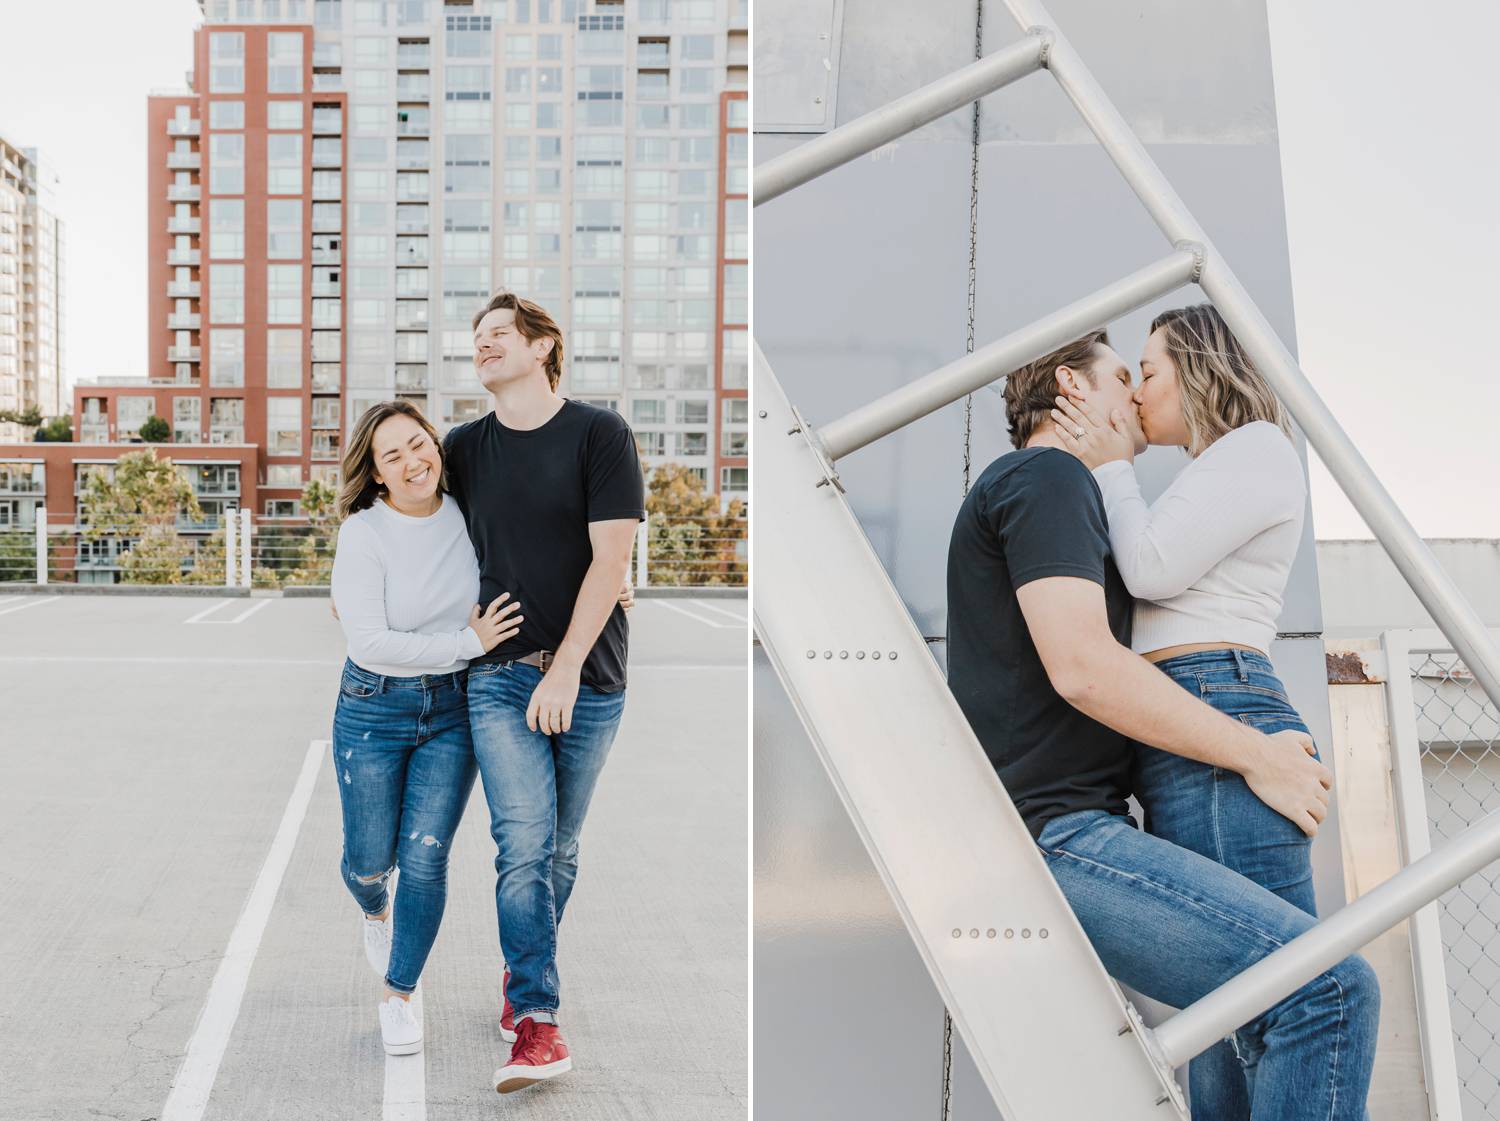 An engaged couple kisses on the roof of a parking garage